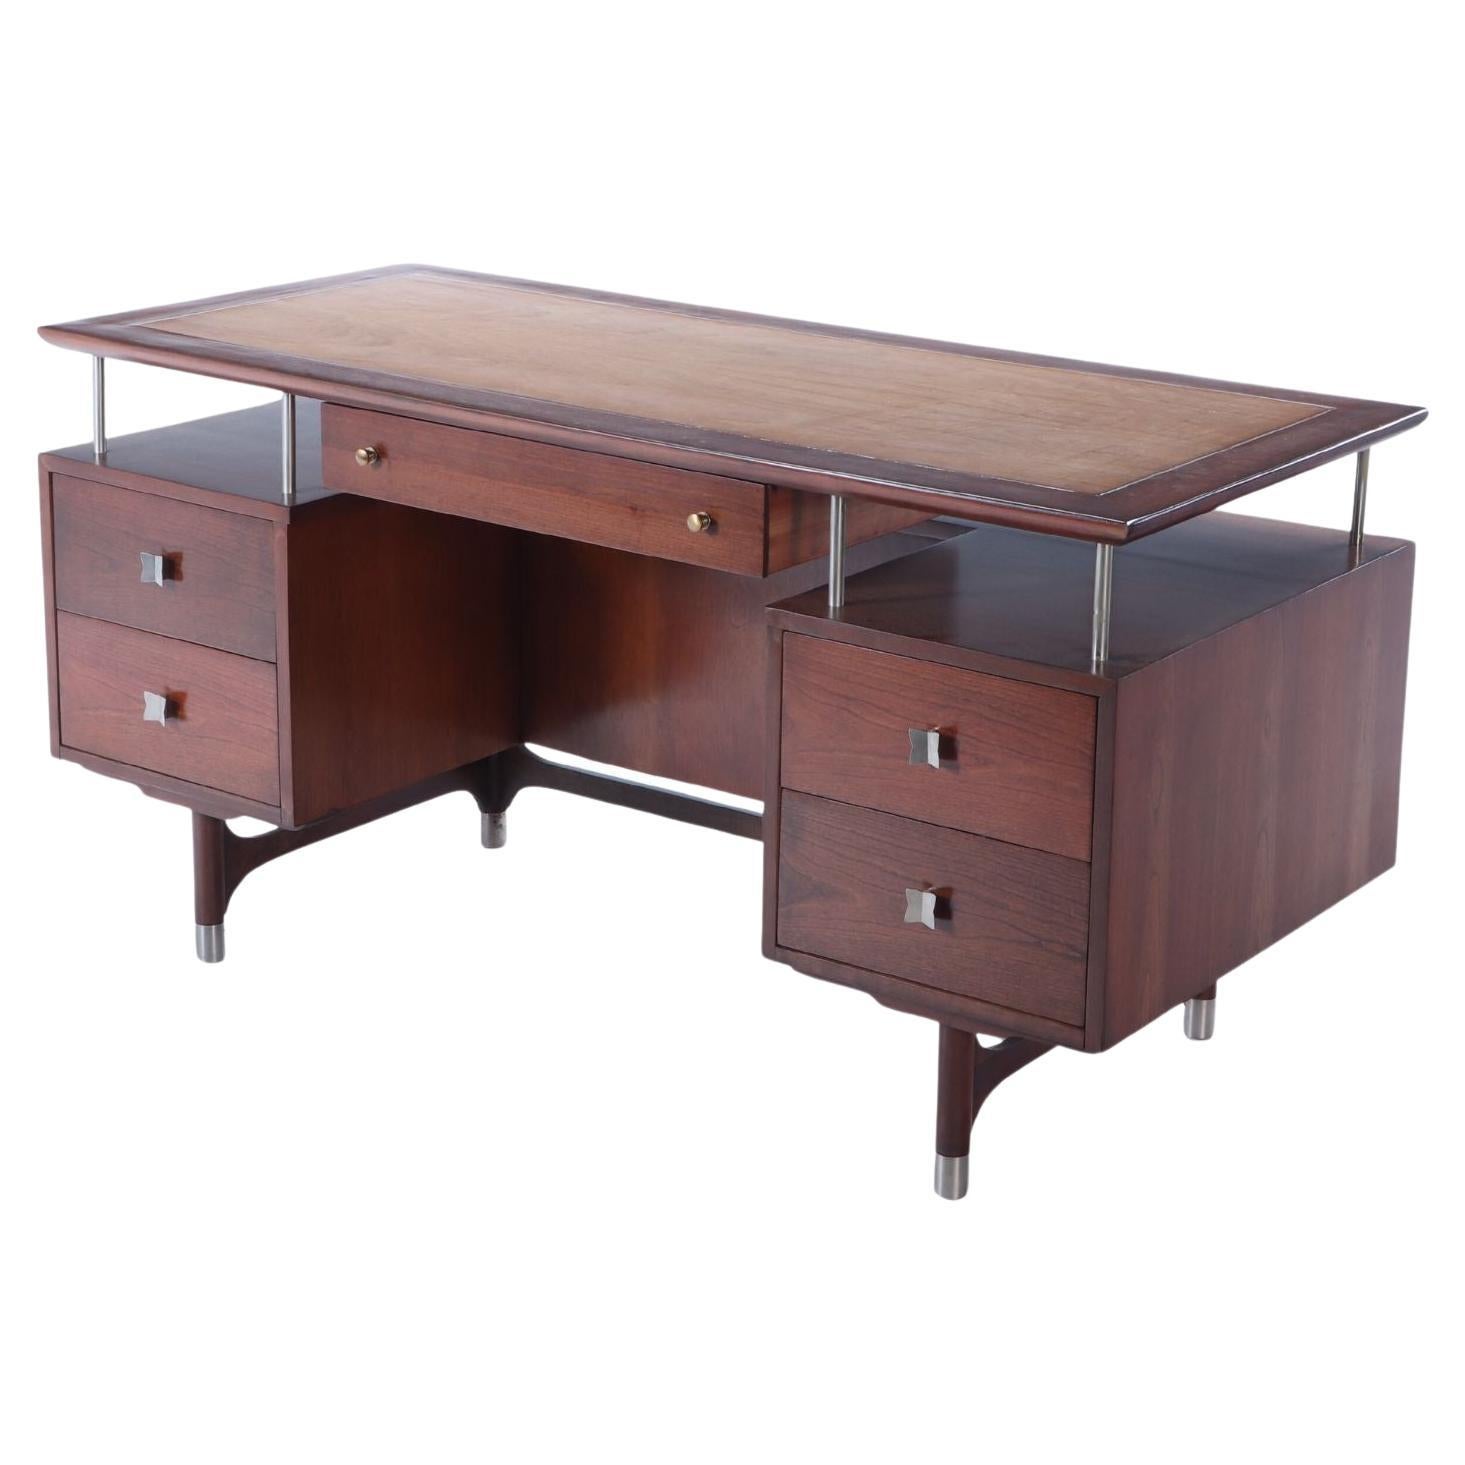 A Jens Risom mid century modern, double pedestal executive desk in cherry wood